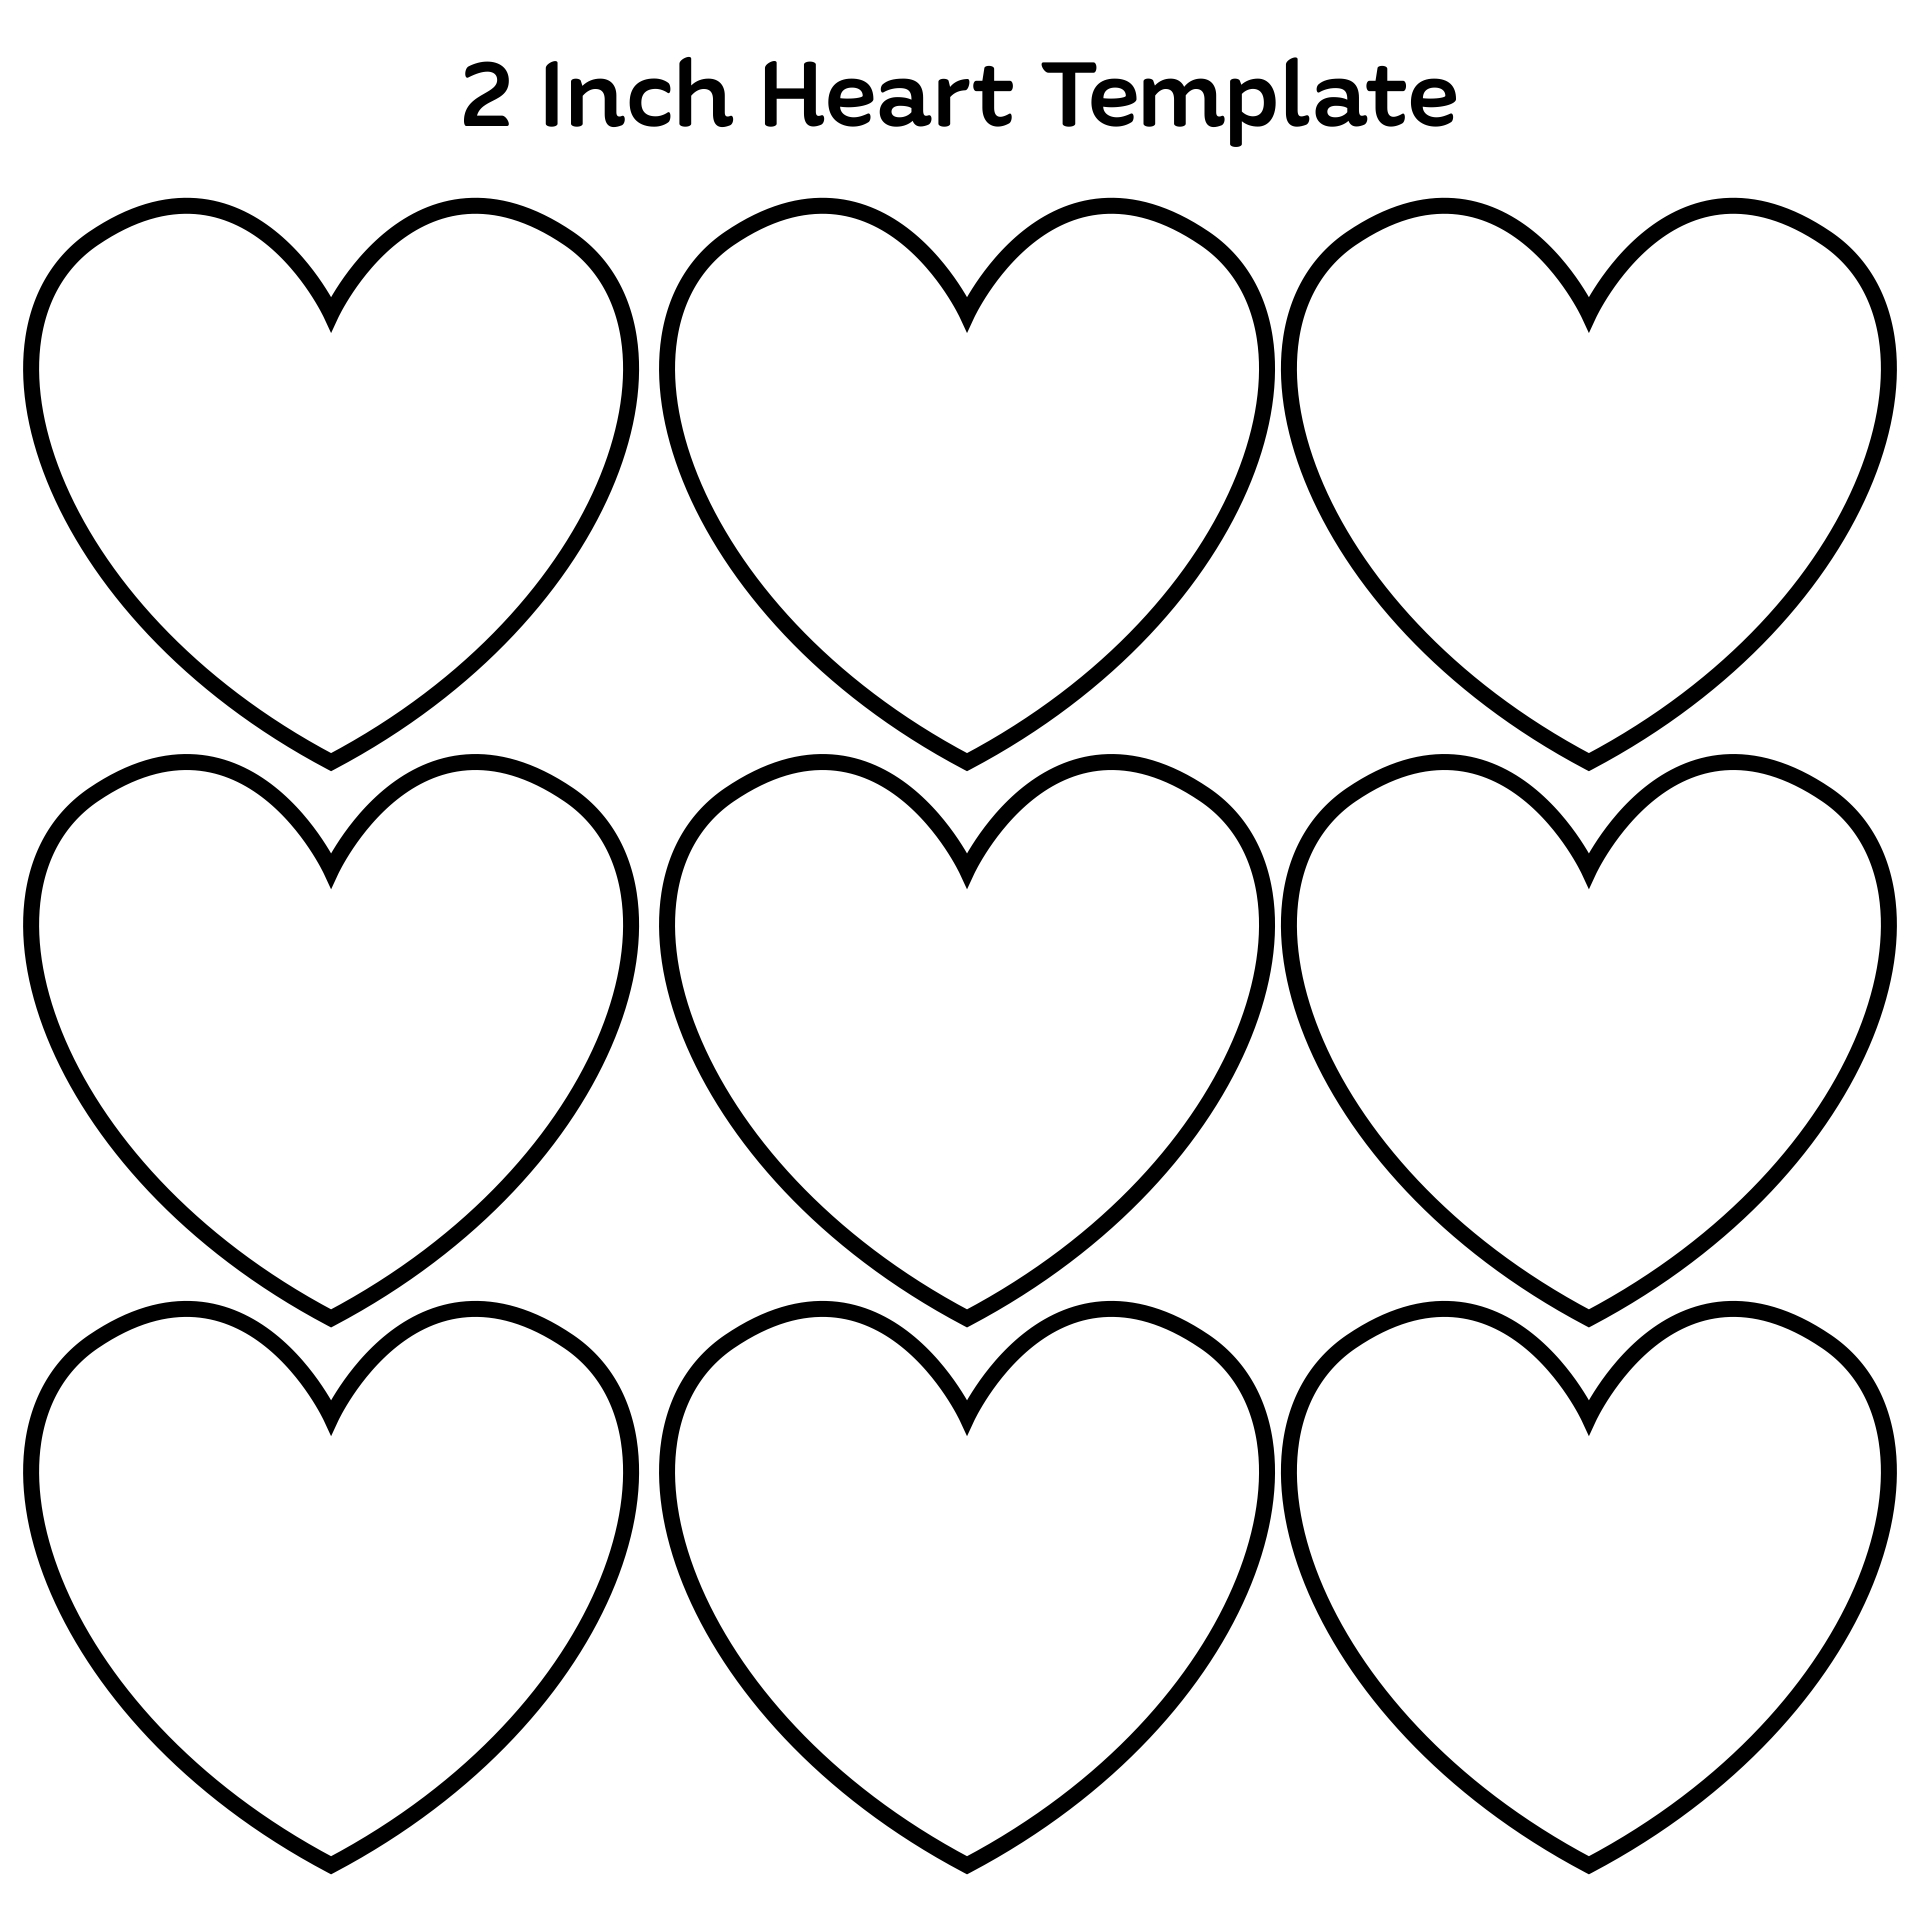 download-and-print-these-heart-templates-pdf-files-in-small-medium-or